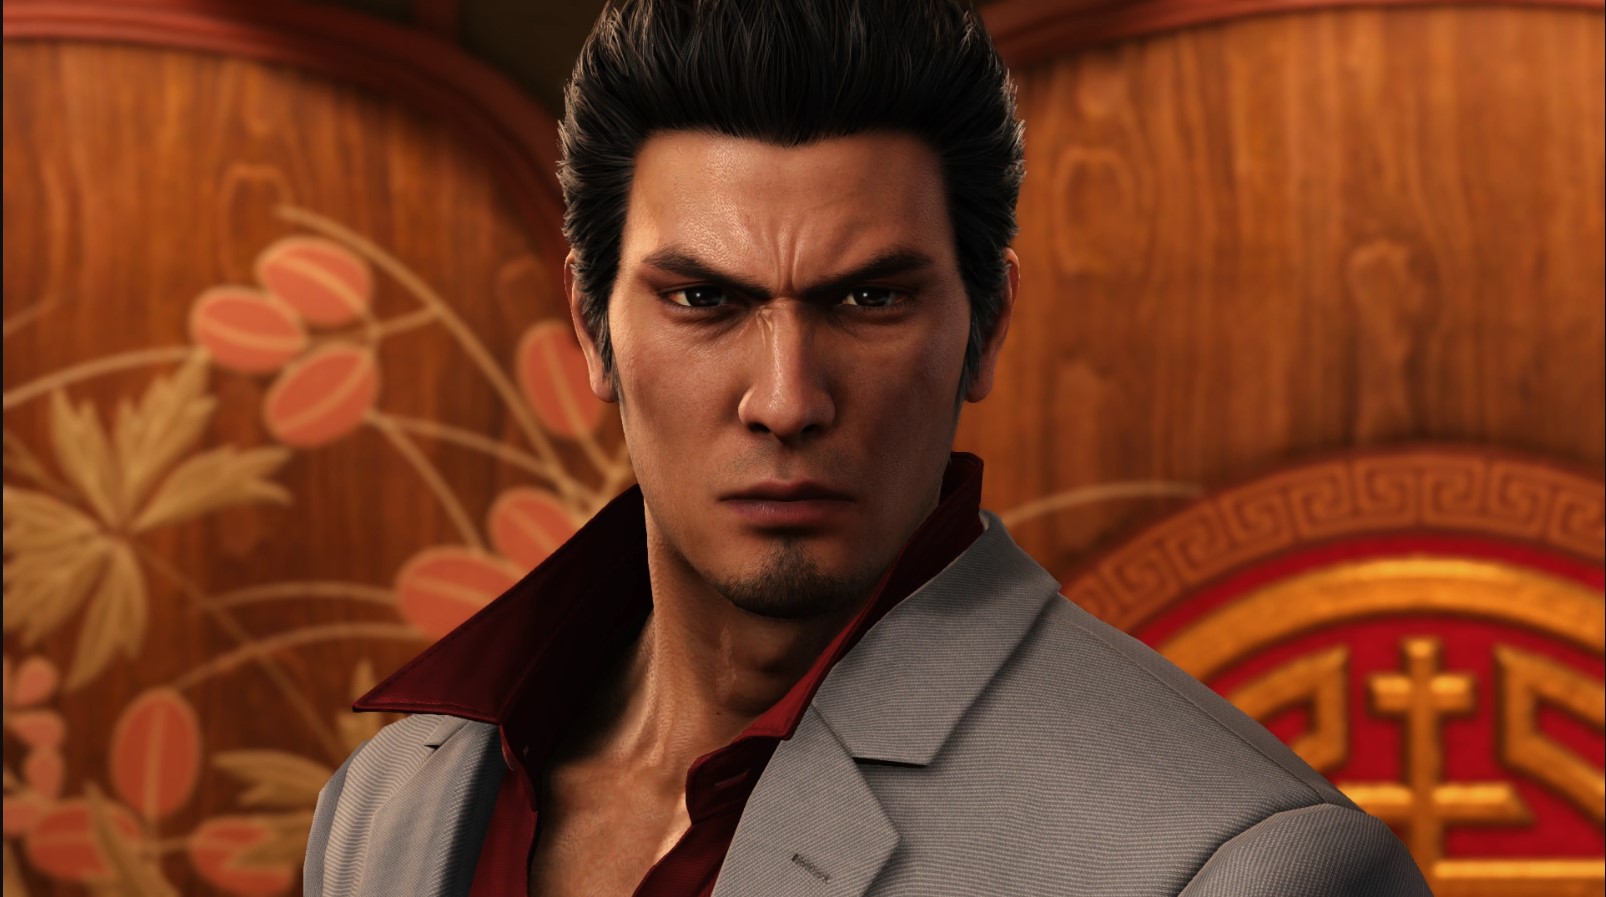 Kazuma Kiryu in a red shirt and gray suit jacket